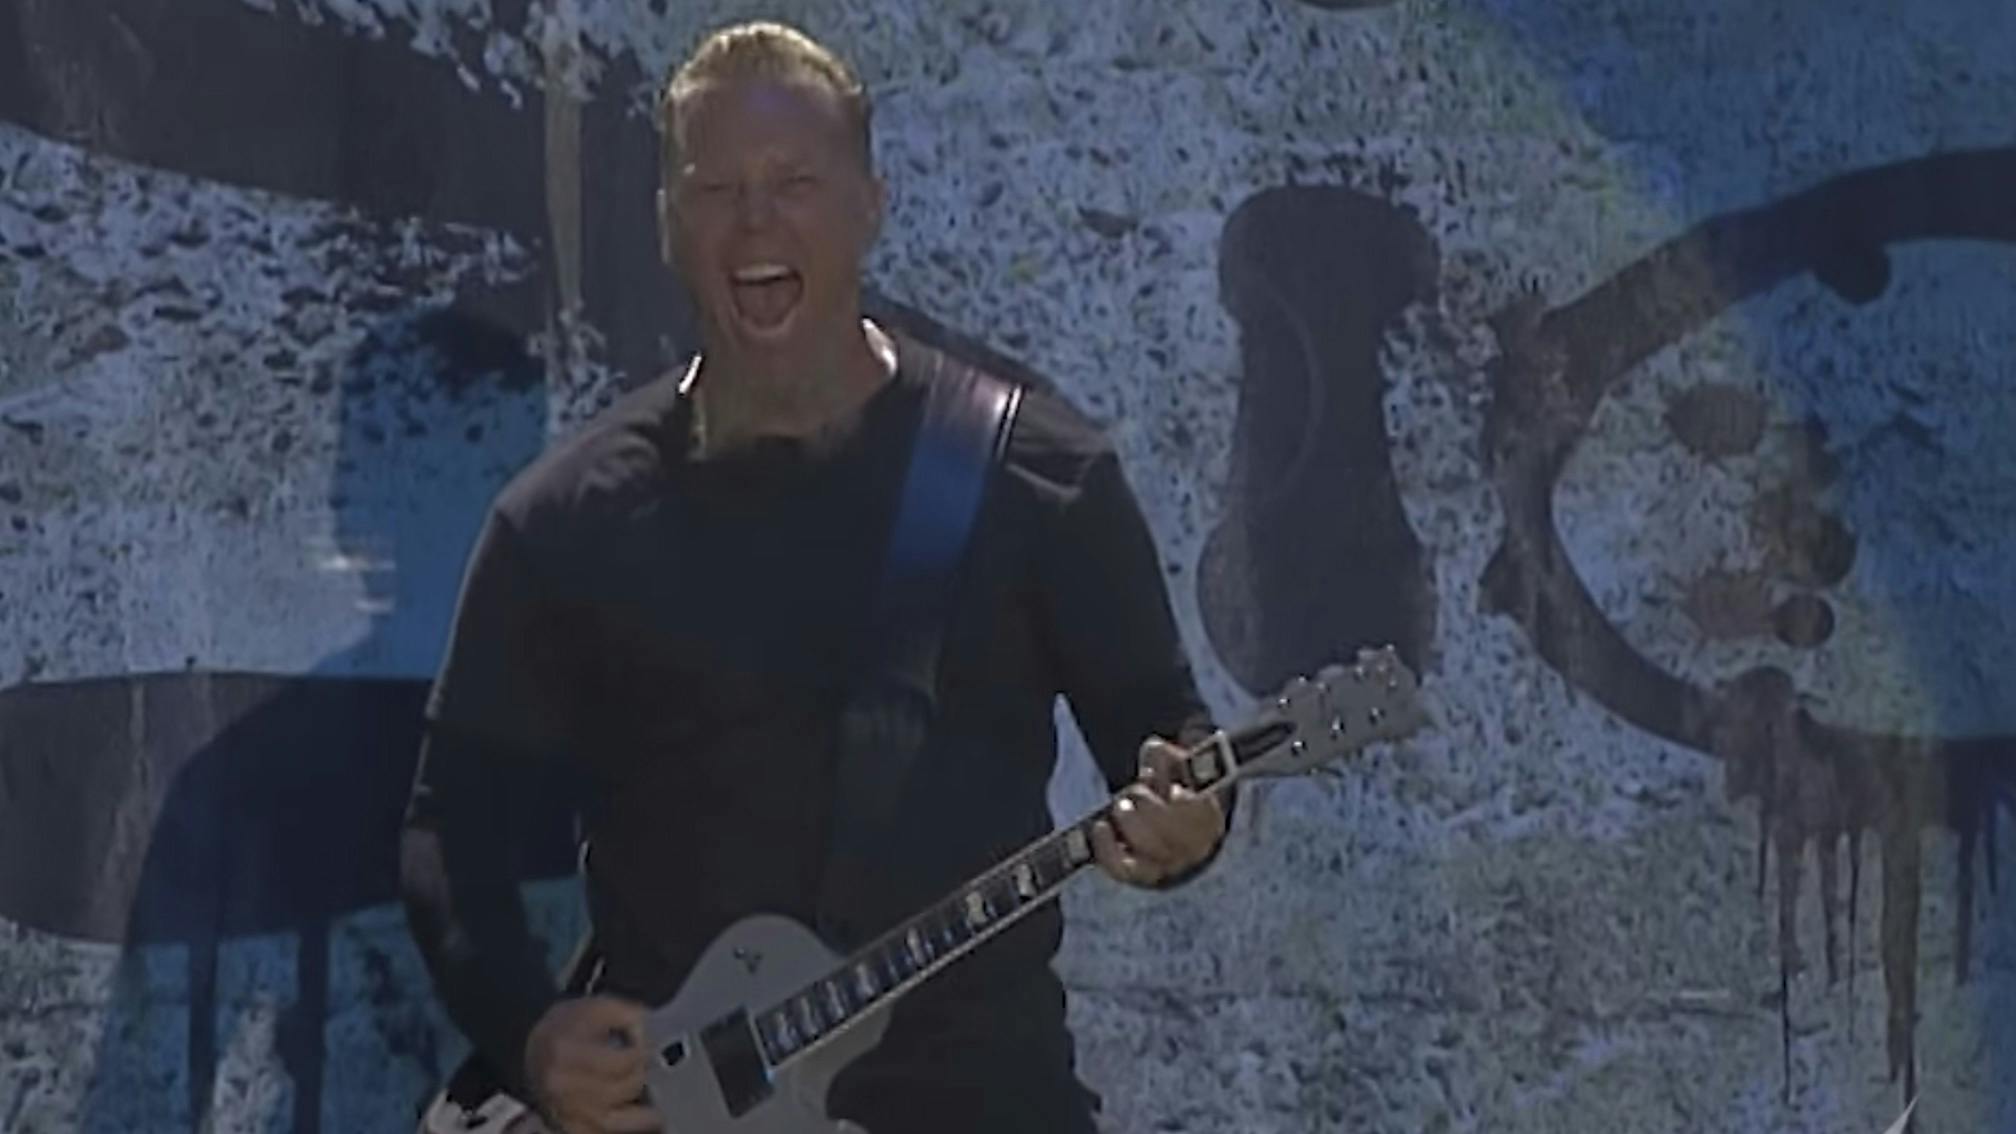 Watch Metallica's First Show On Their Sick Of The Studio 2007 Tour